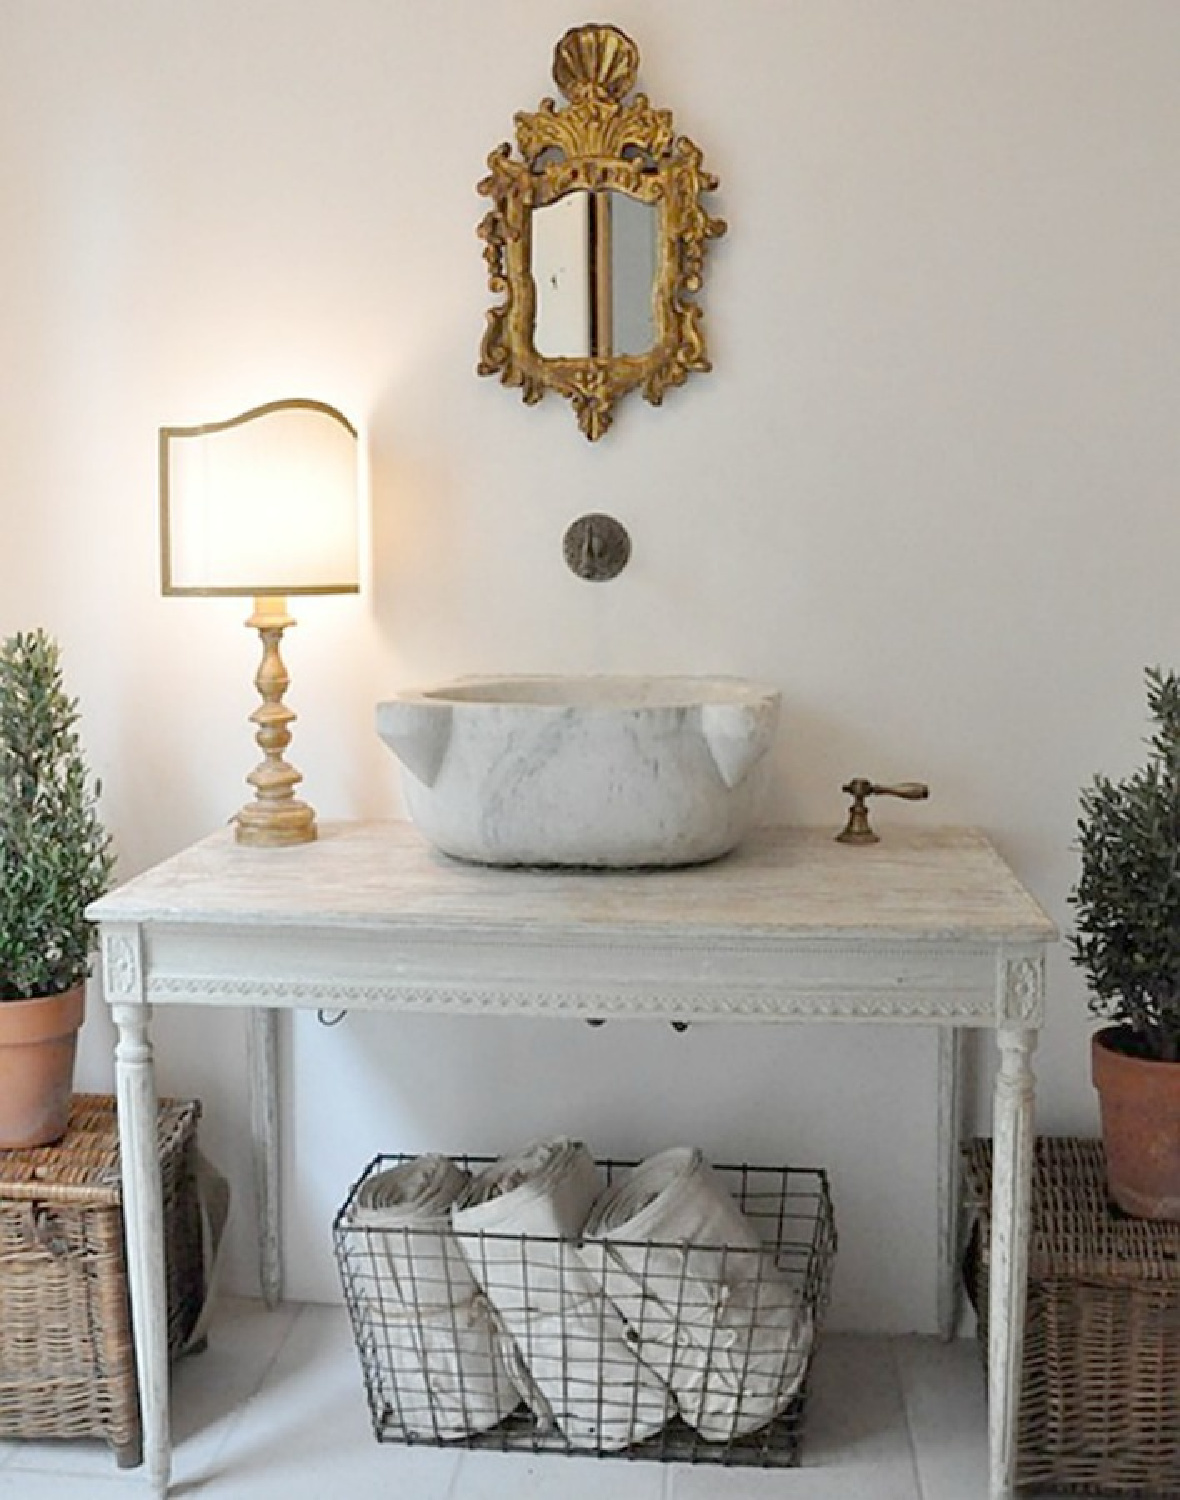 When a rustic French farmhouse powder room with repurposed antique table and vessel sink is this gorgeous, who would want to leave? Design by Brooke Giannetti. #europeancountry #oldworld #bathroom